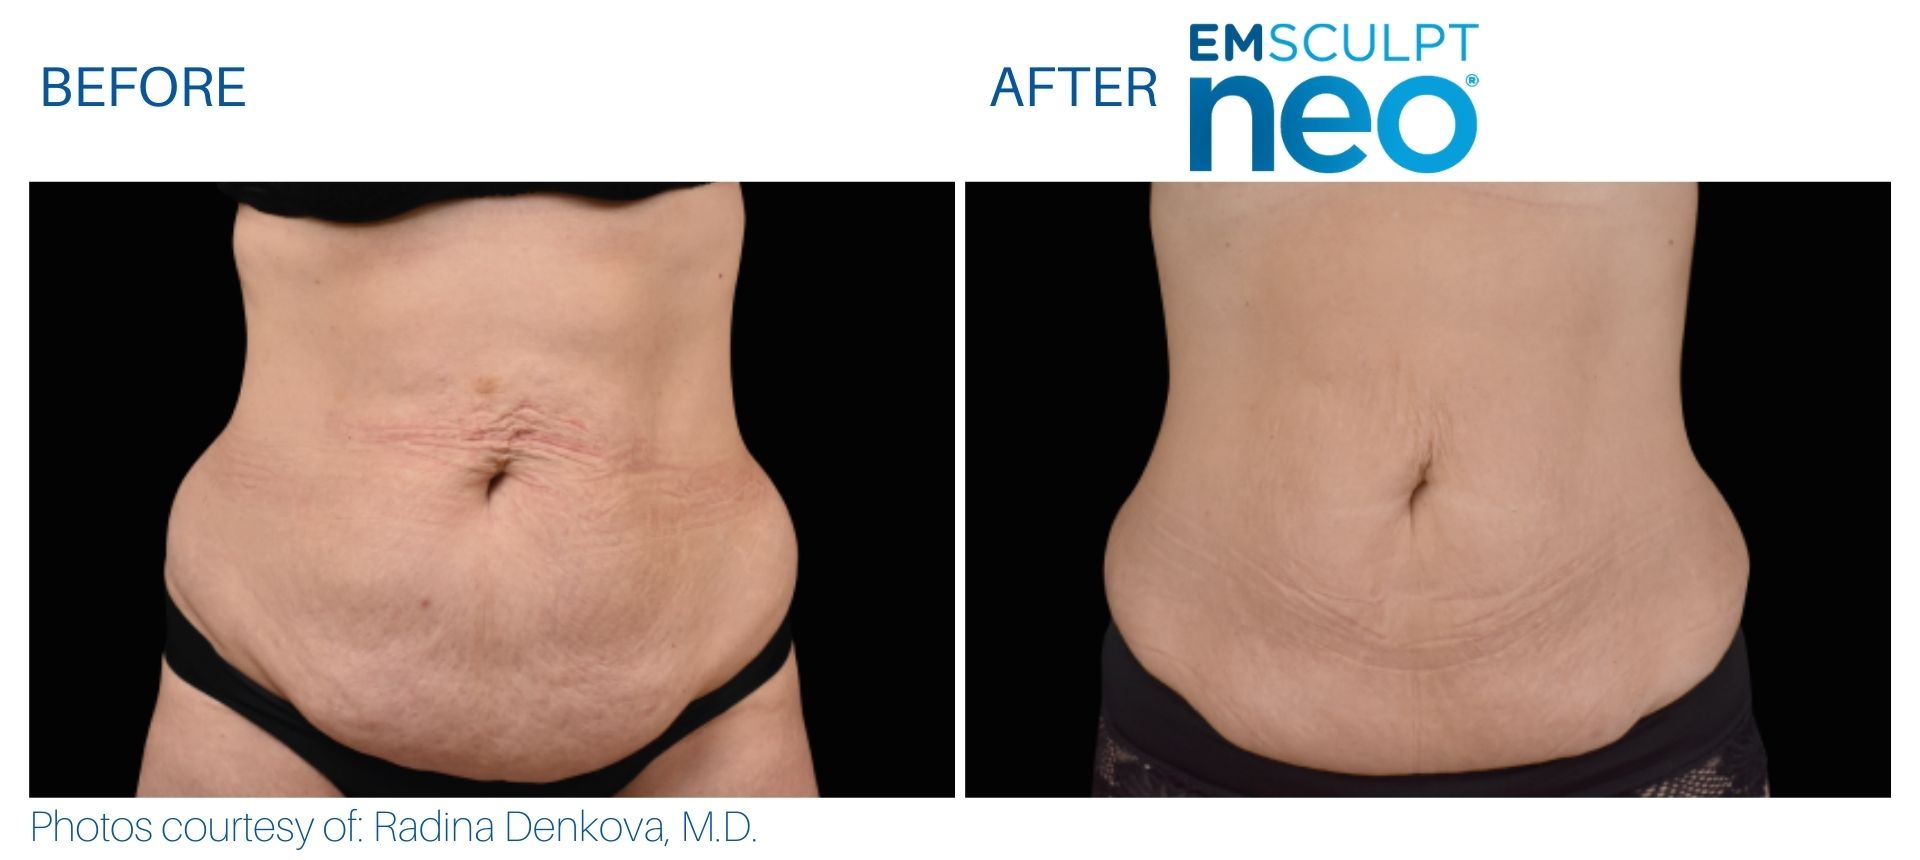 Emsculpt Neo Before And After Of Abdomen Showing Results. Treatments Available At Optimum.